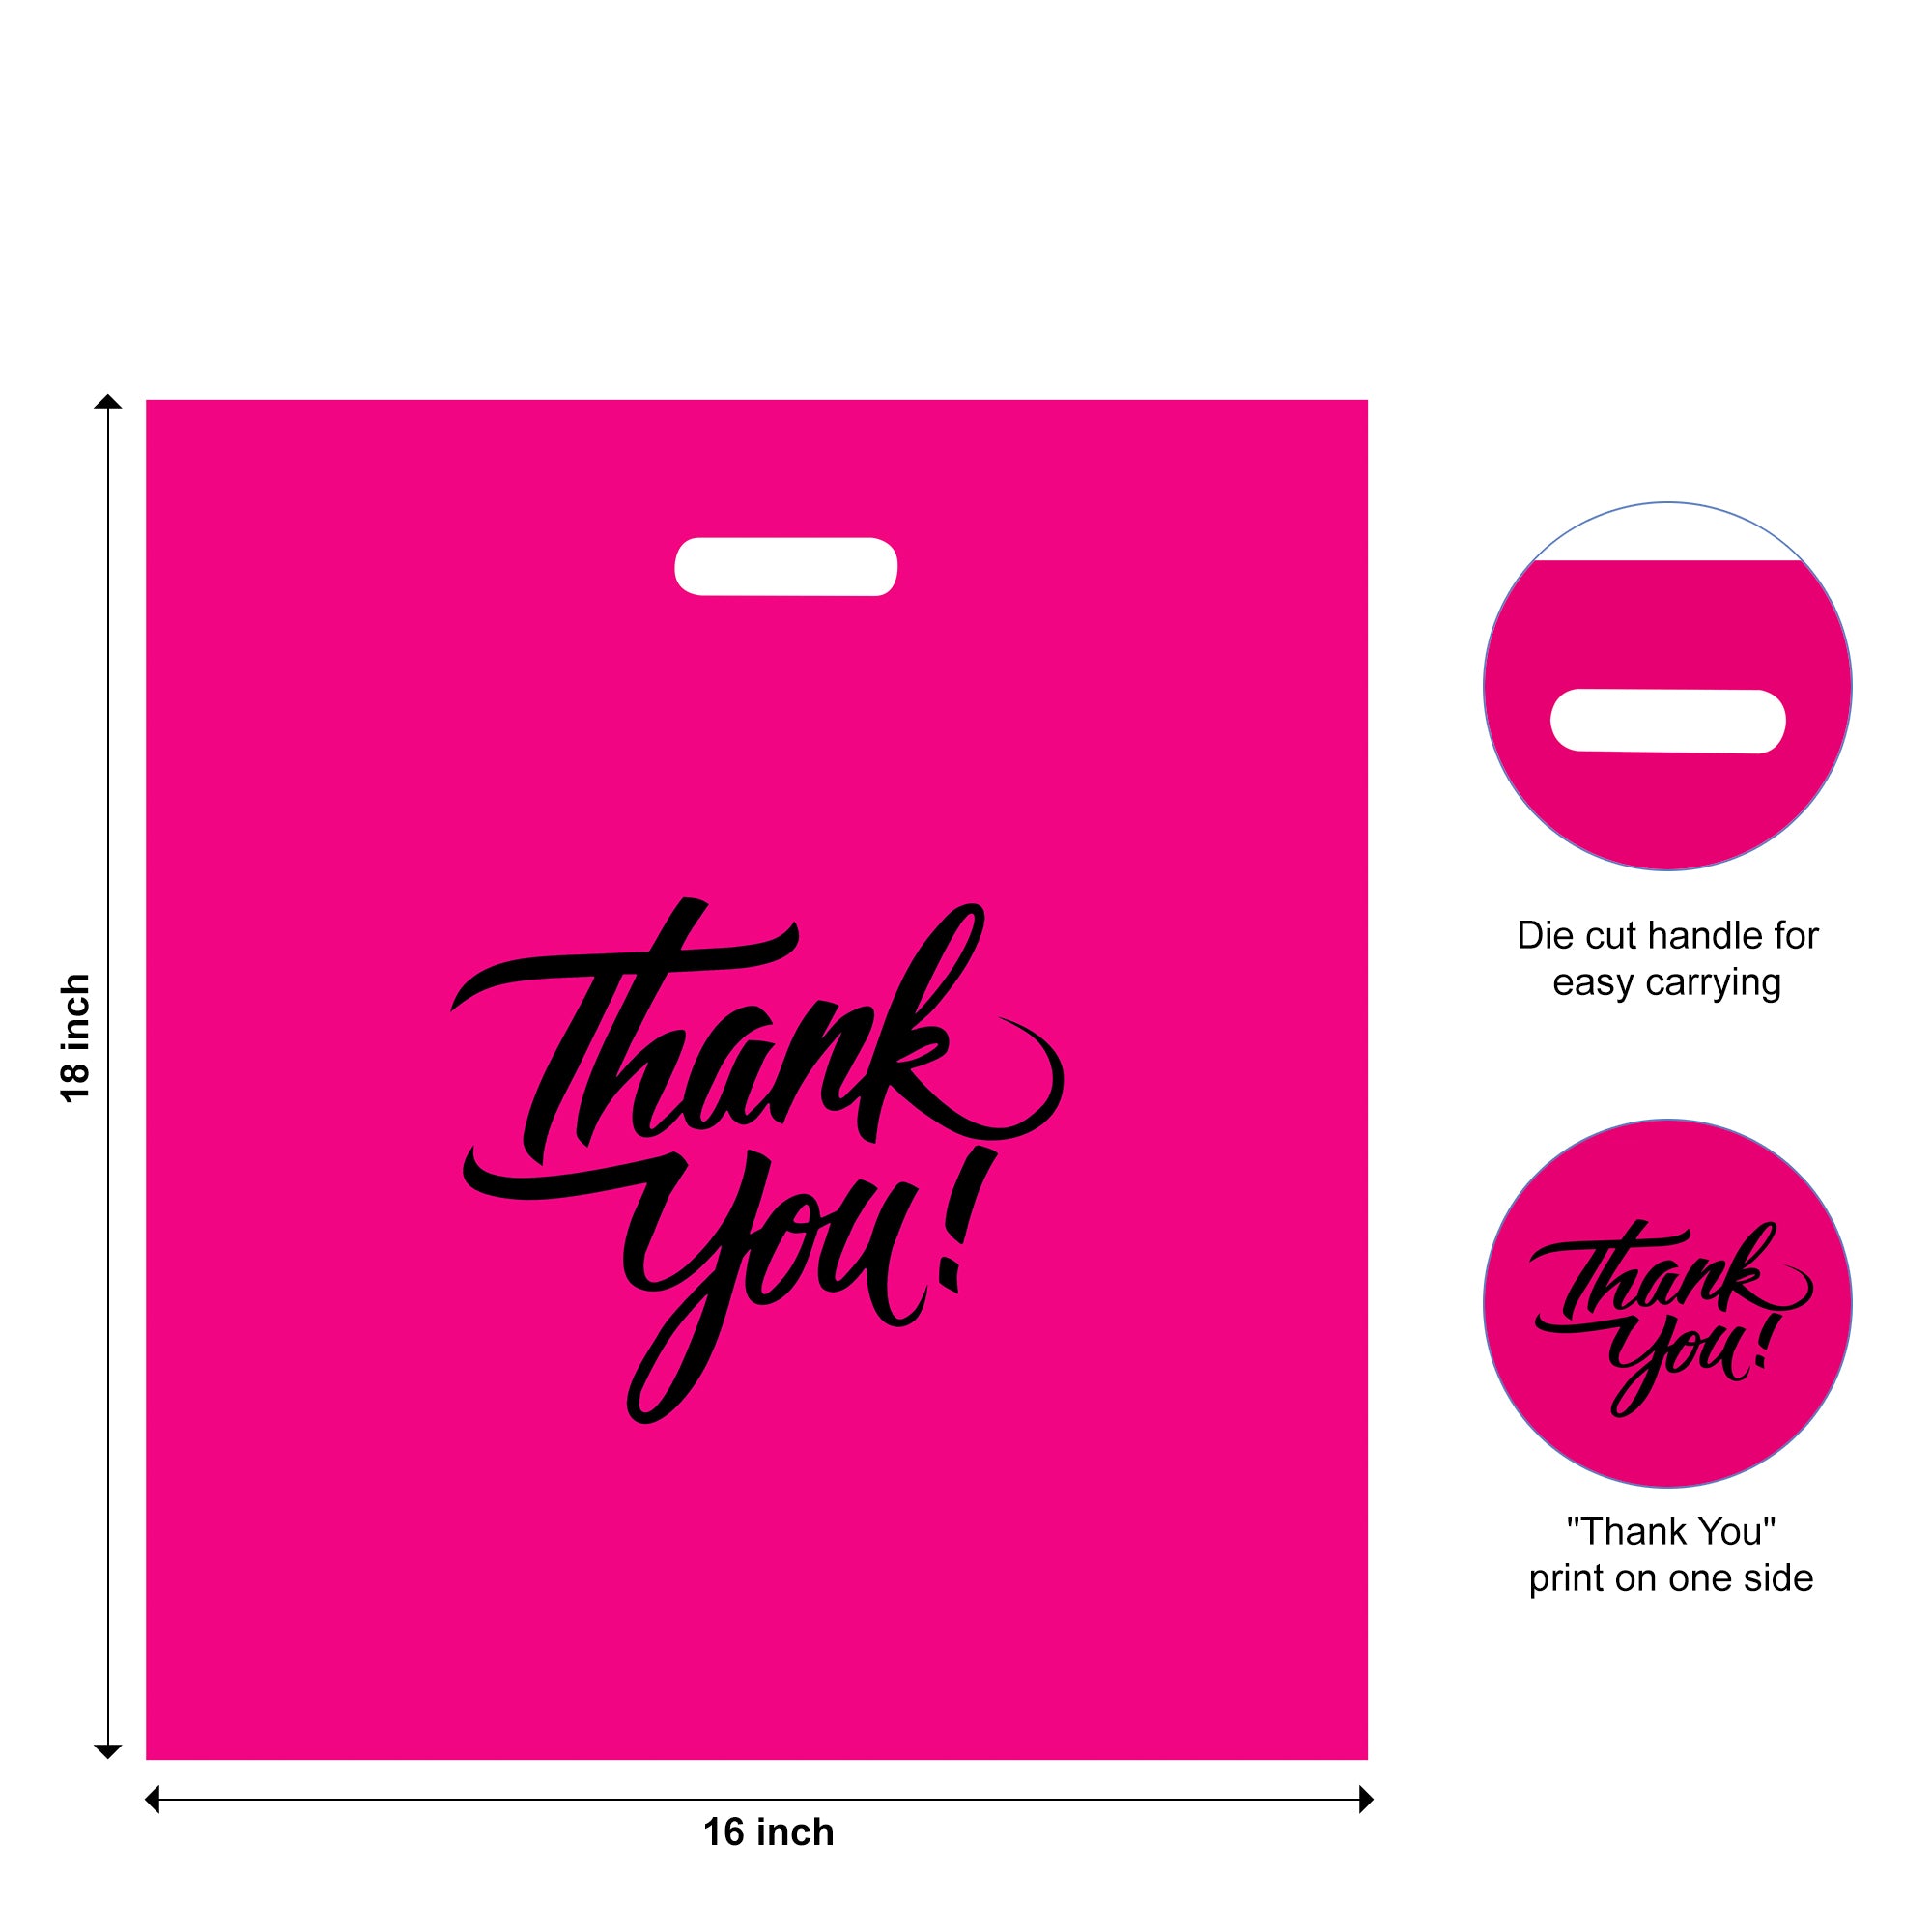 16 x 18 pink thank you bags with die cut handle with size 